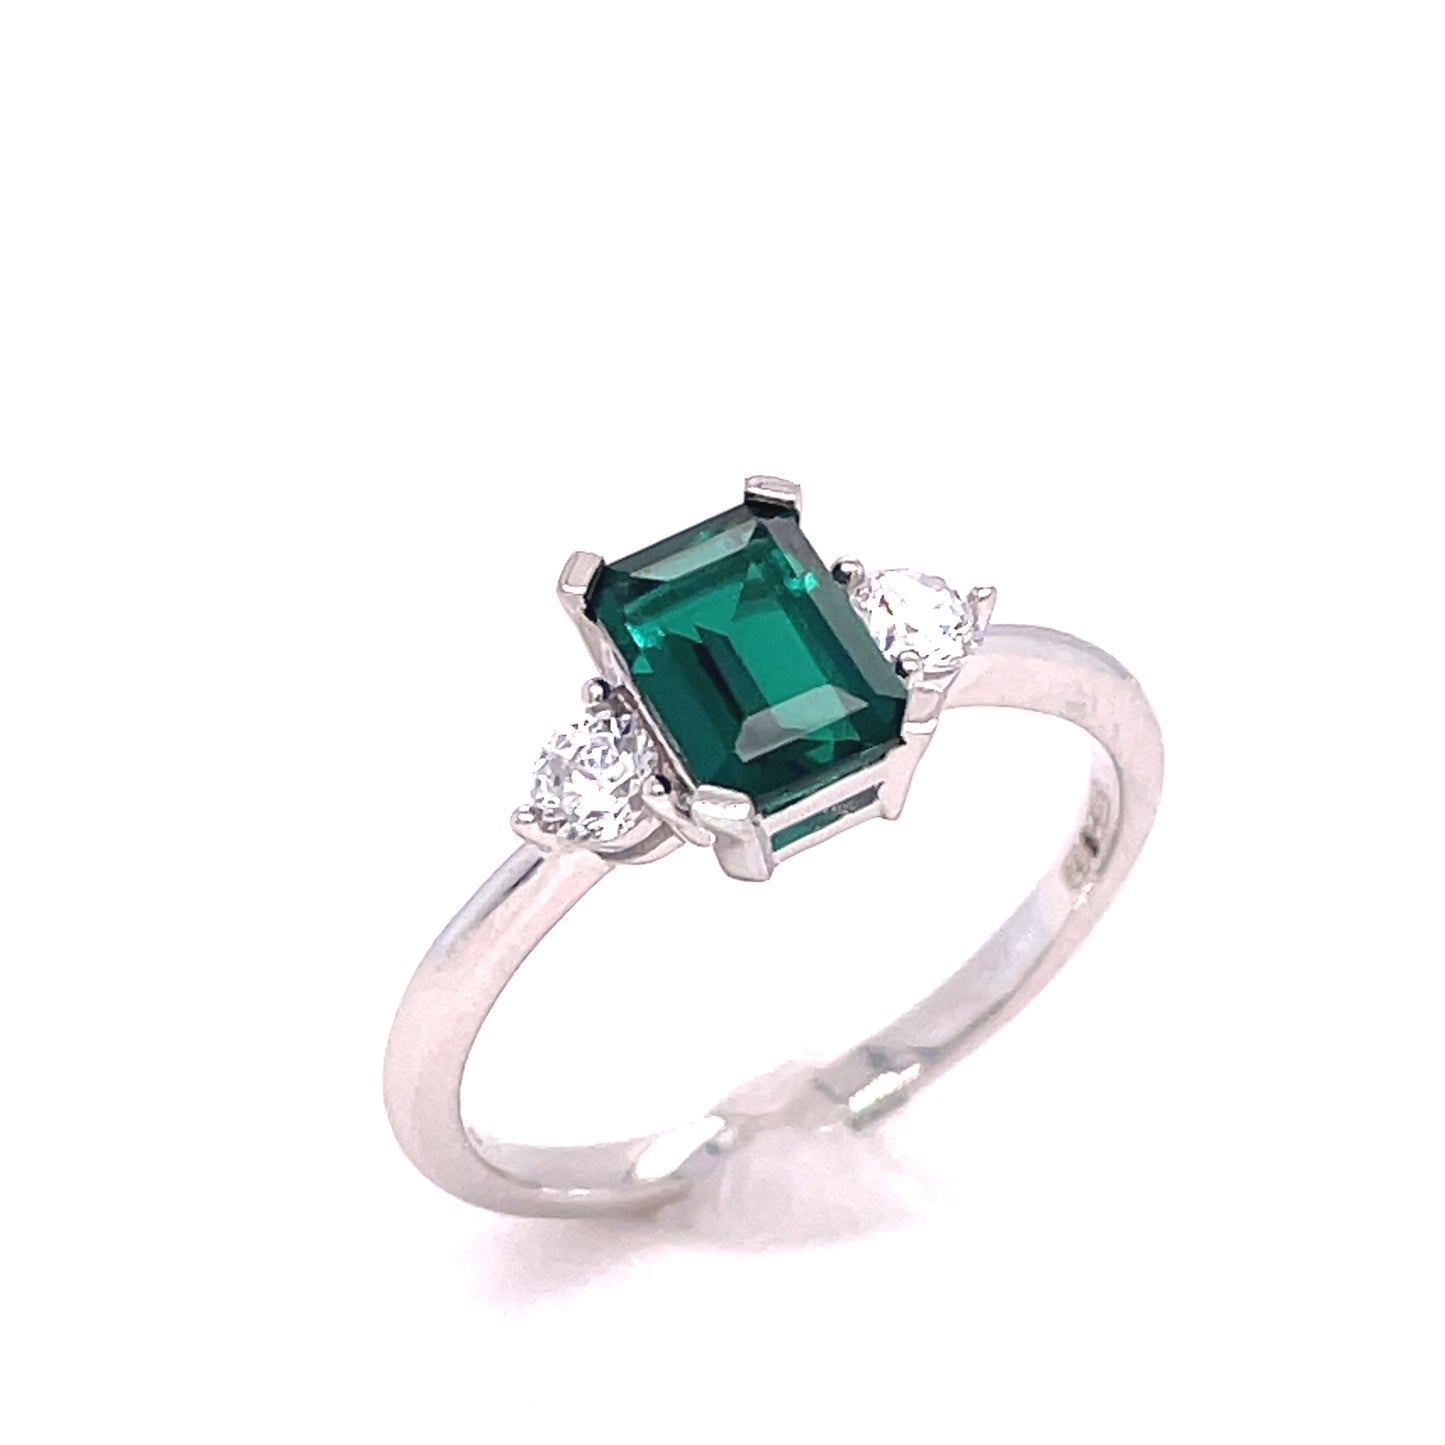 9ct White Gold Green And Cubic Zirconia Ring